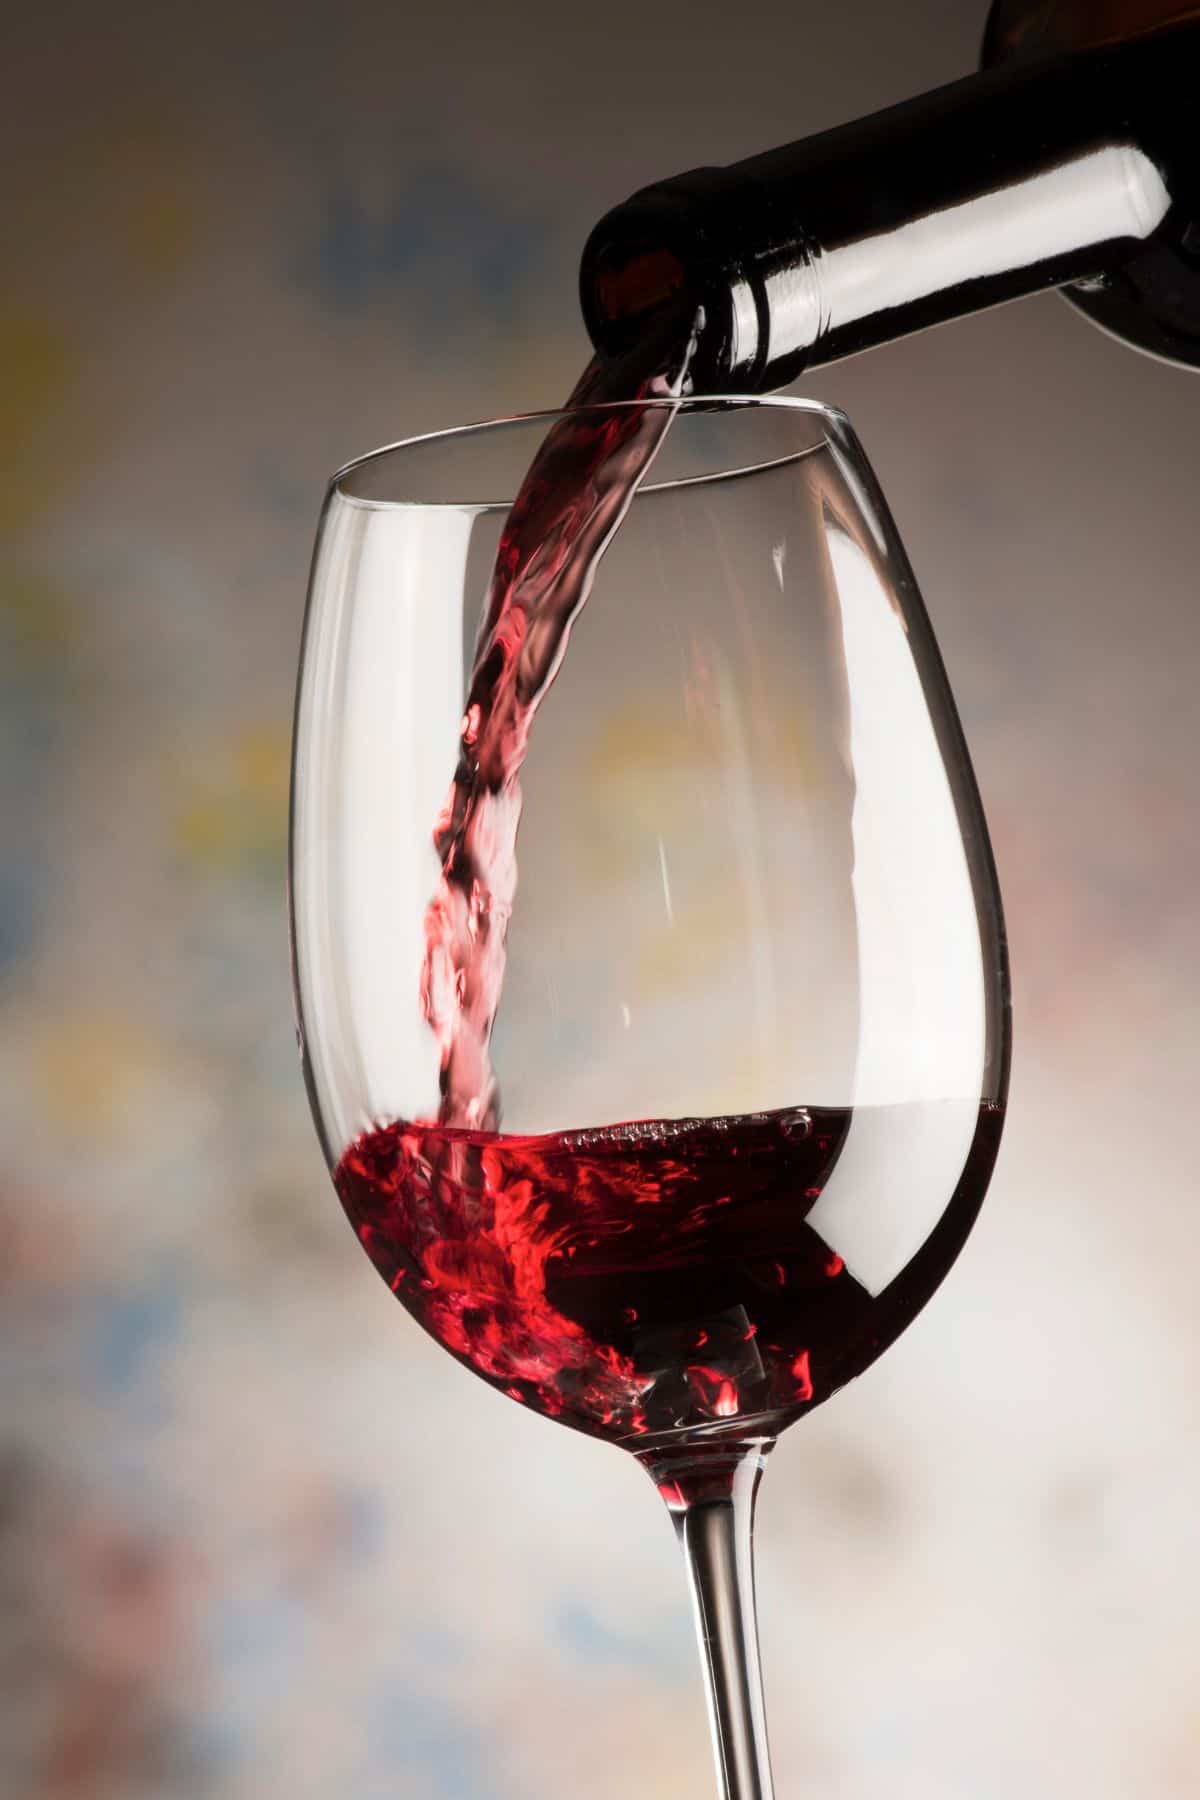 Red wine, which is naturally gluten-free, is poured into a large wine glass.